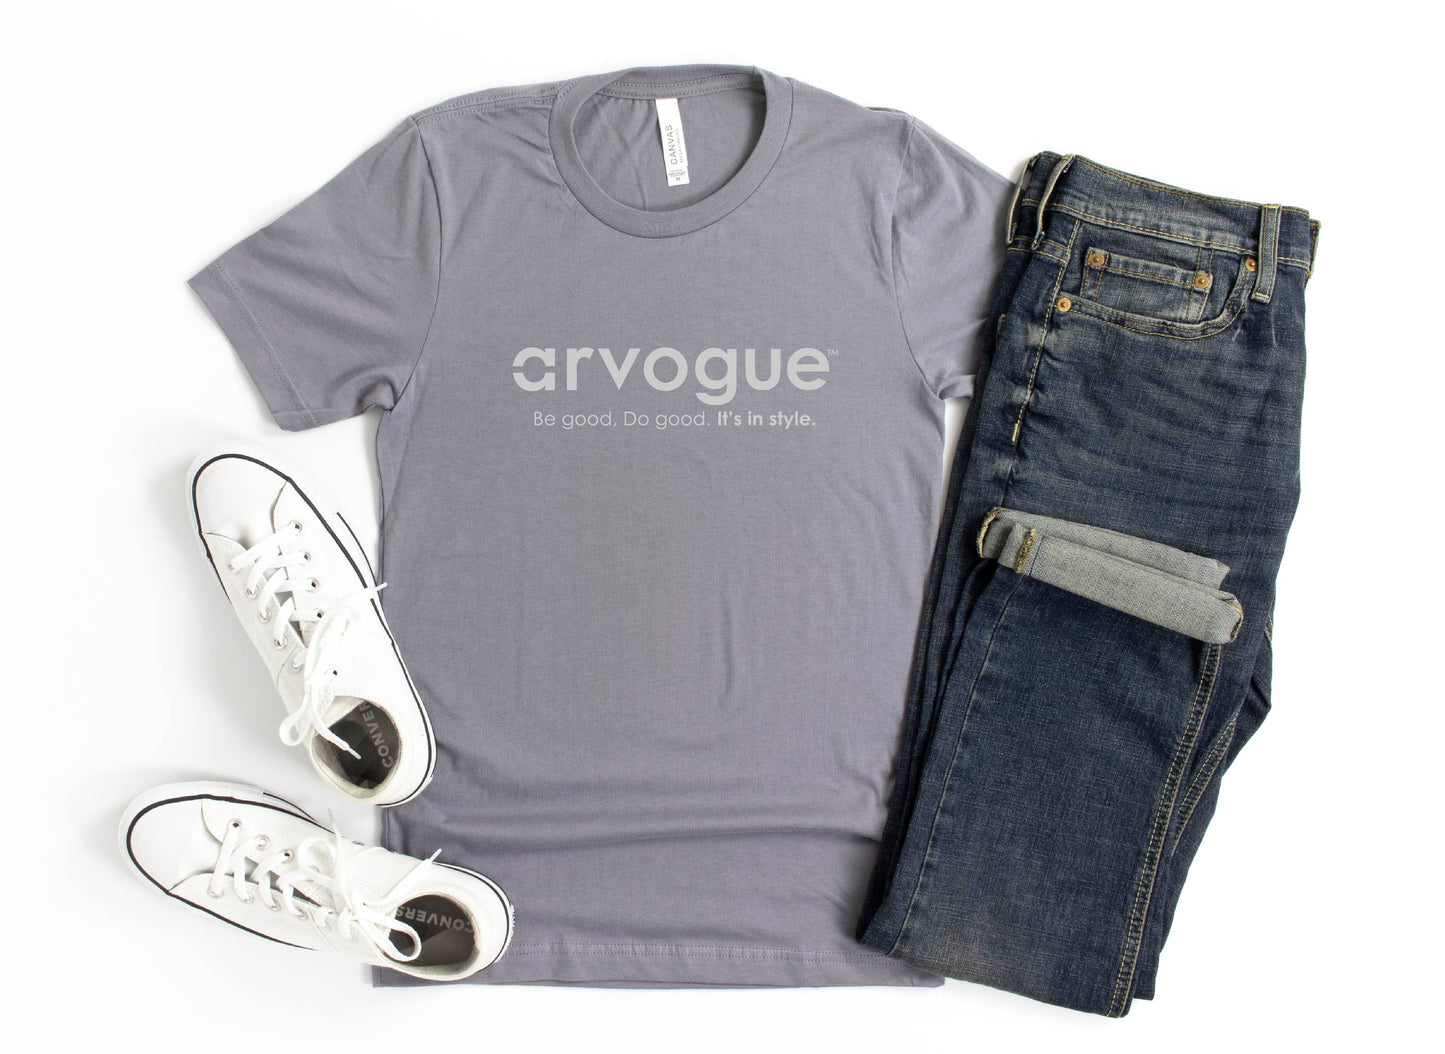 white tennis shoes and blue jeans and a gray Arvogue Women's T Shirt